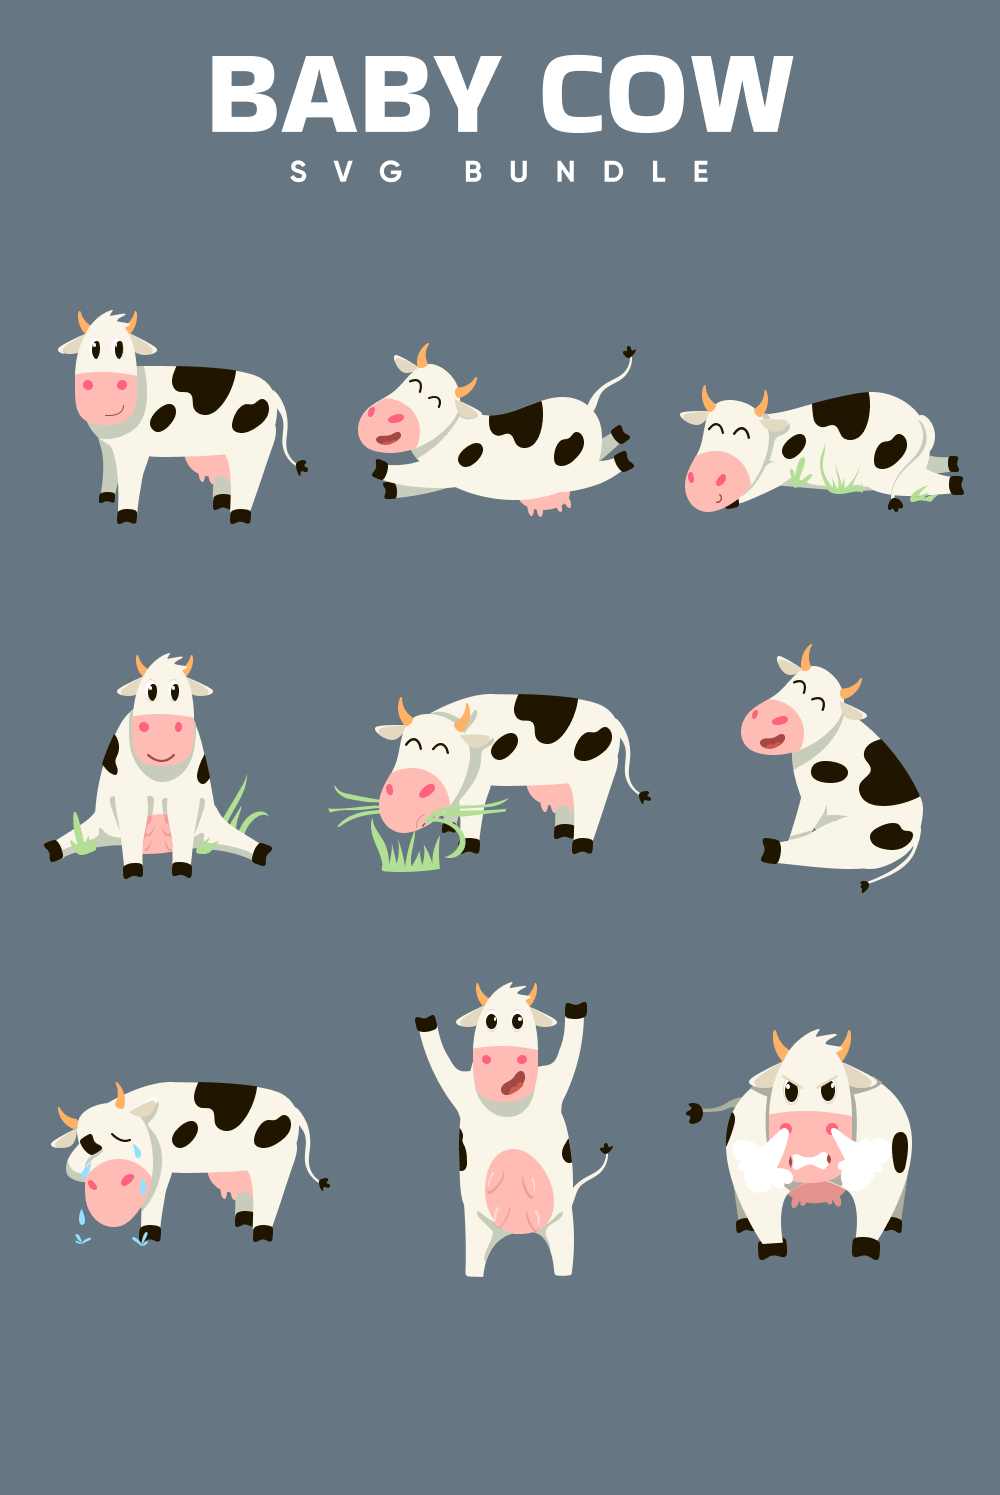 Baby cow svg bundle - animals characters.